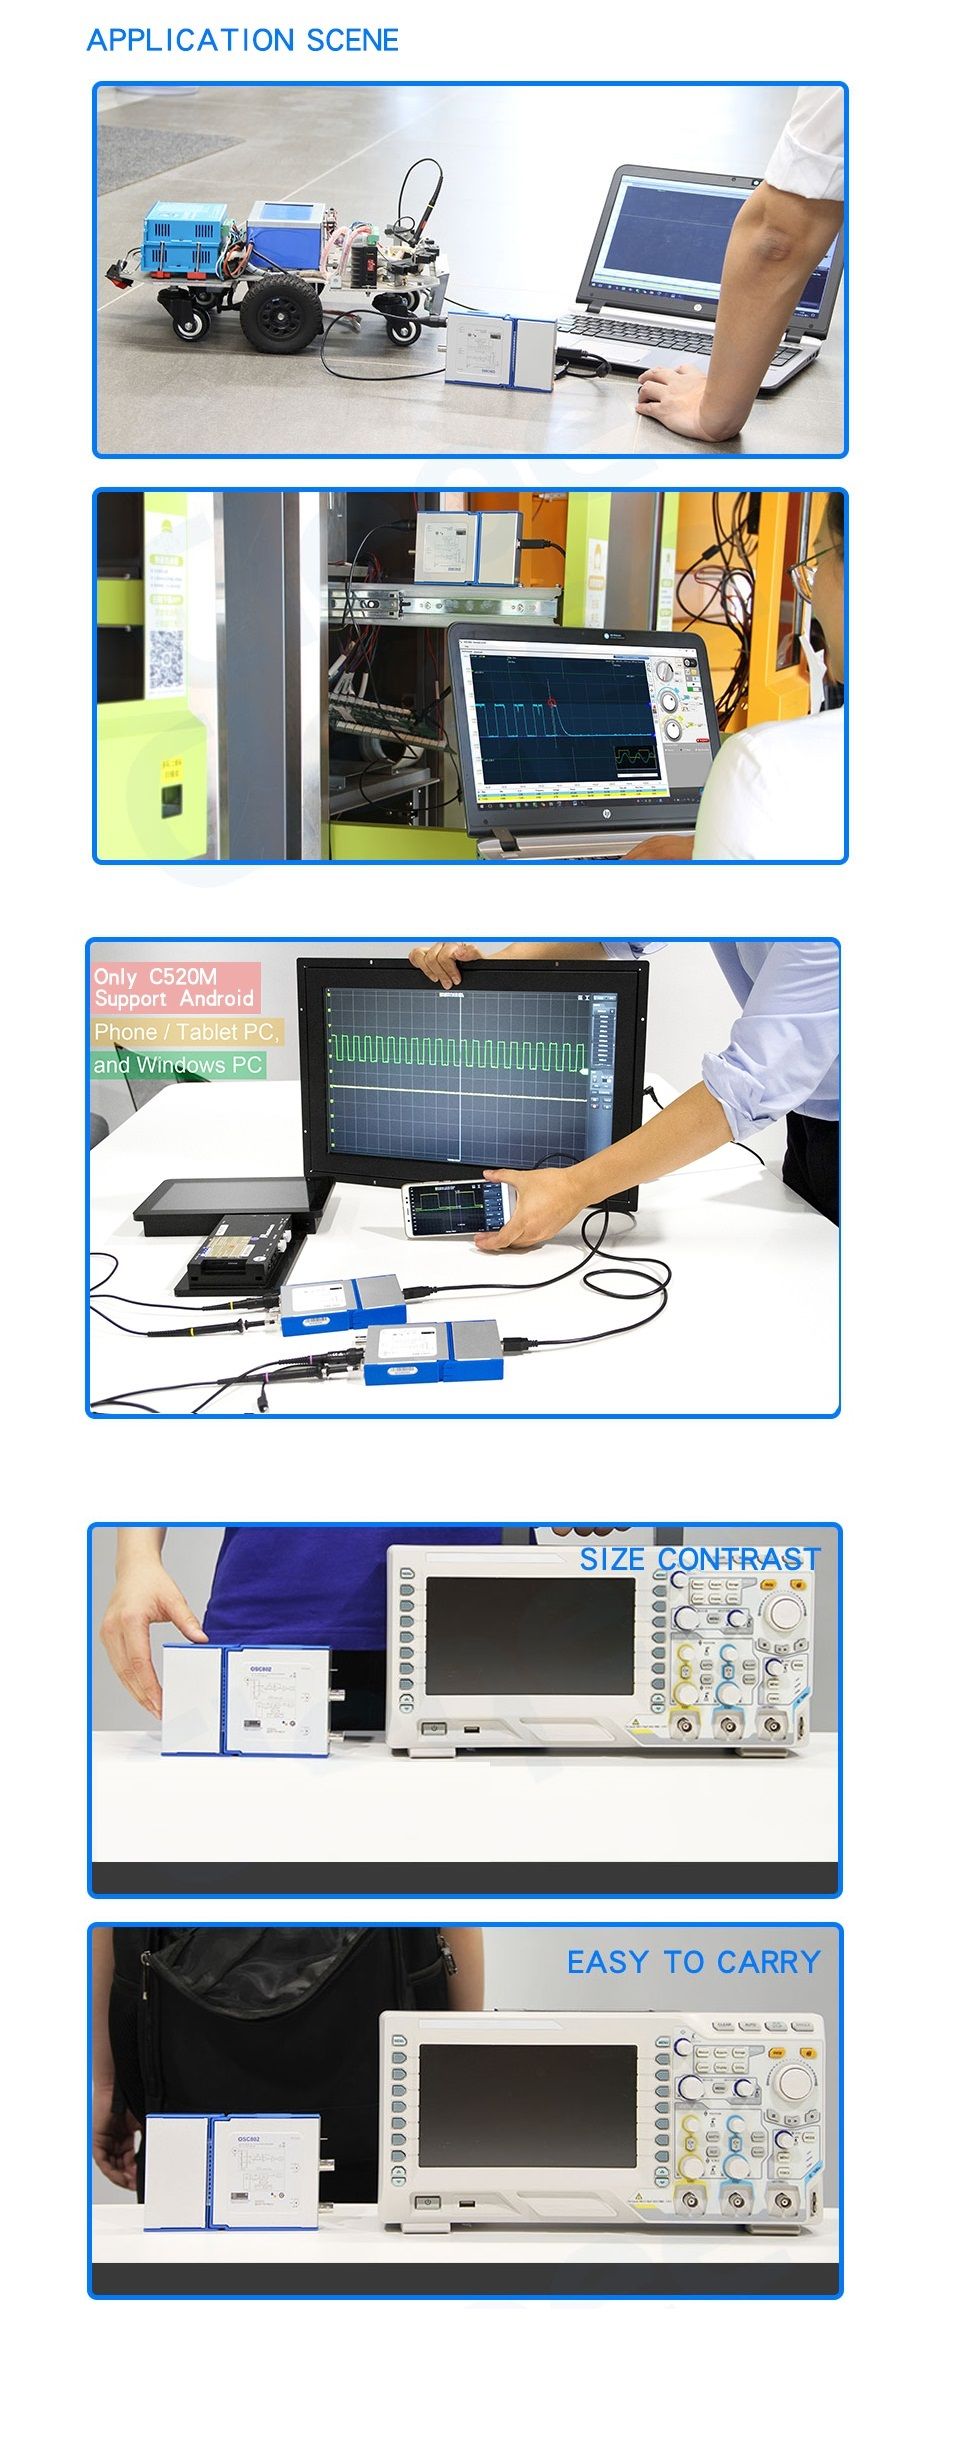 Virtual-Digital-Handheld-Oscilloscope-can-connect-AndroidampPC-2-Channel-Bandwidth-20Mhz50Mhz-Sampli-1542756